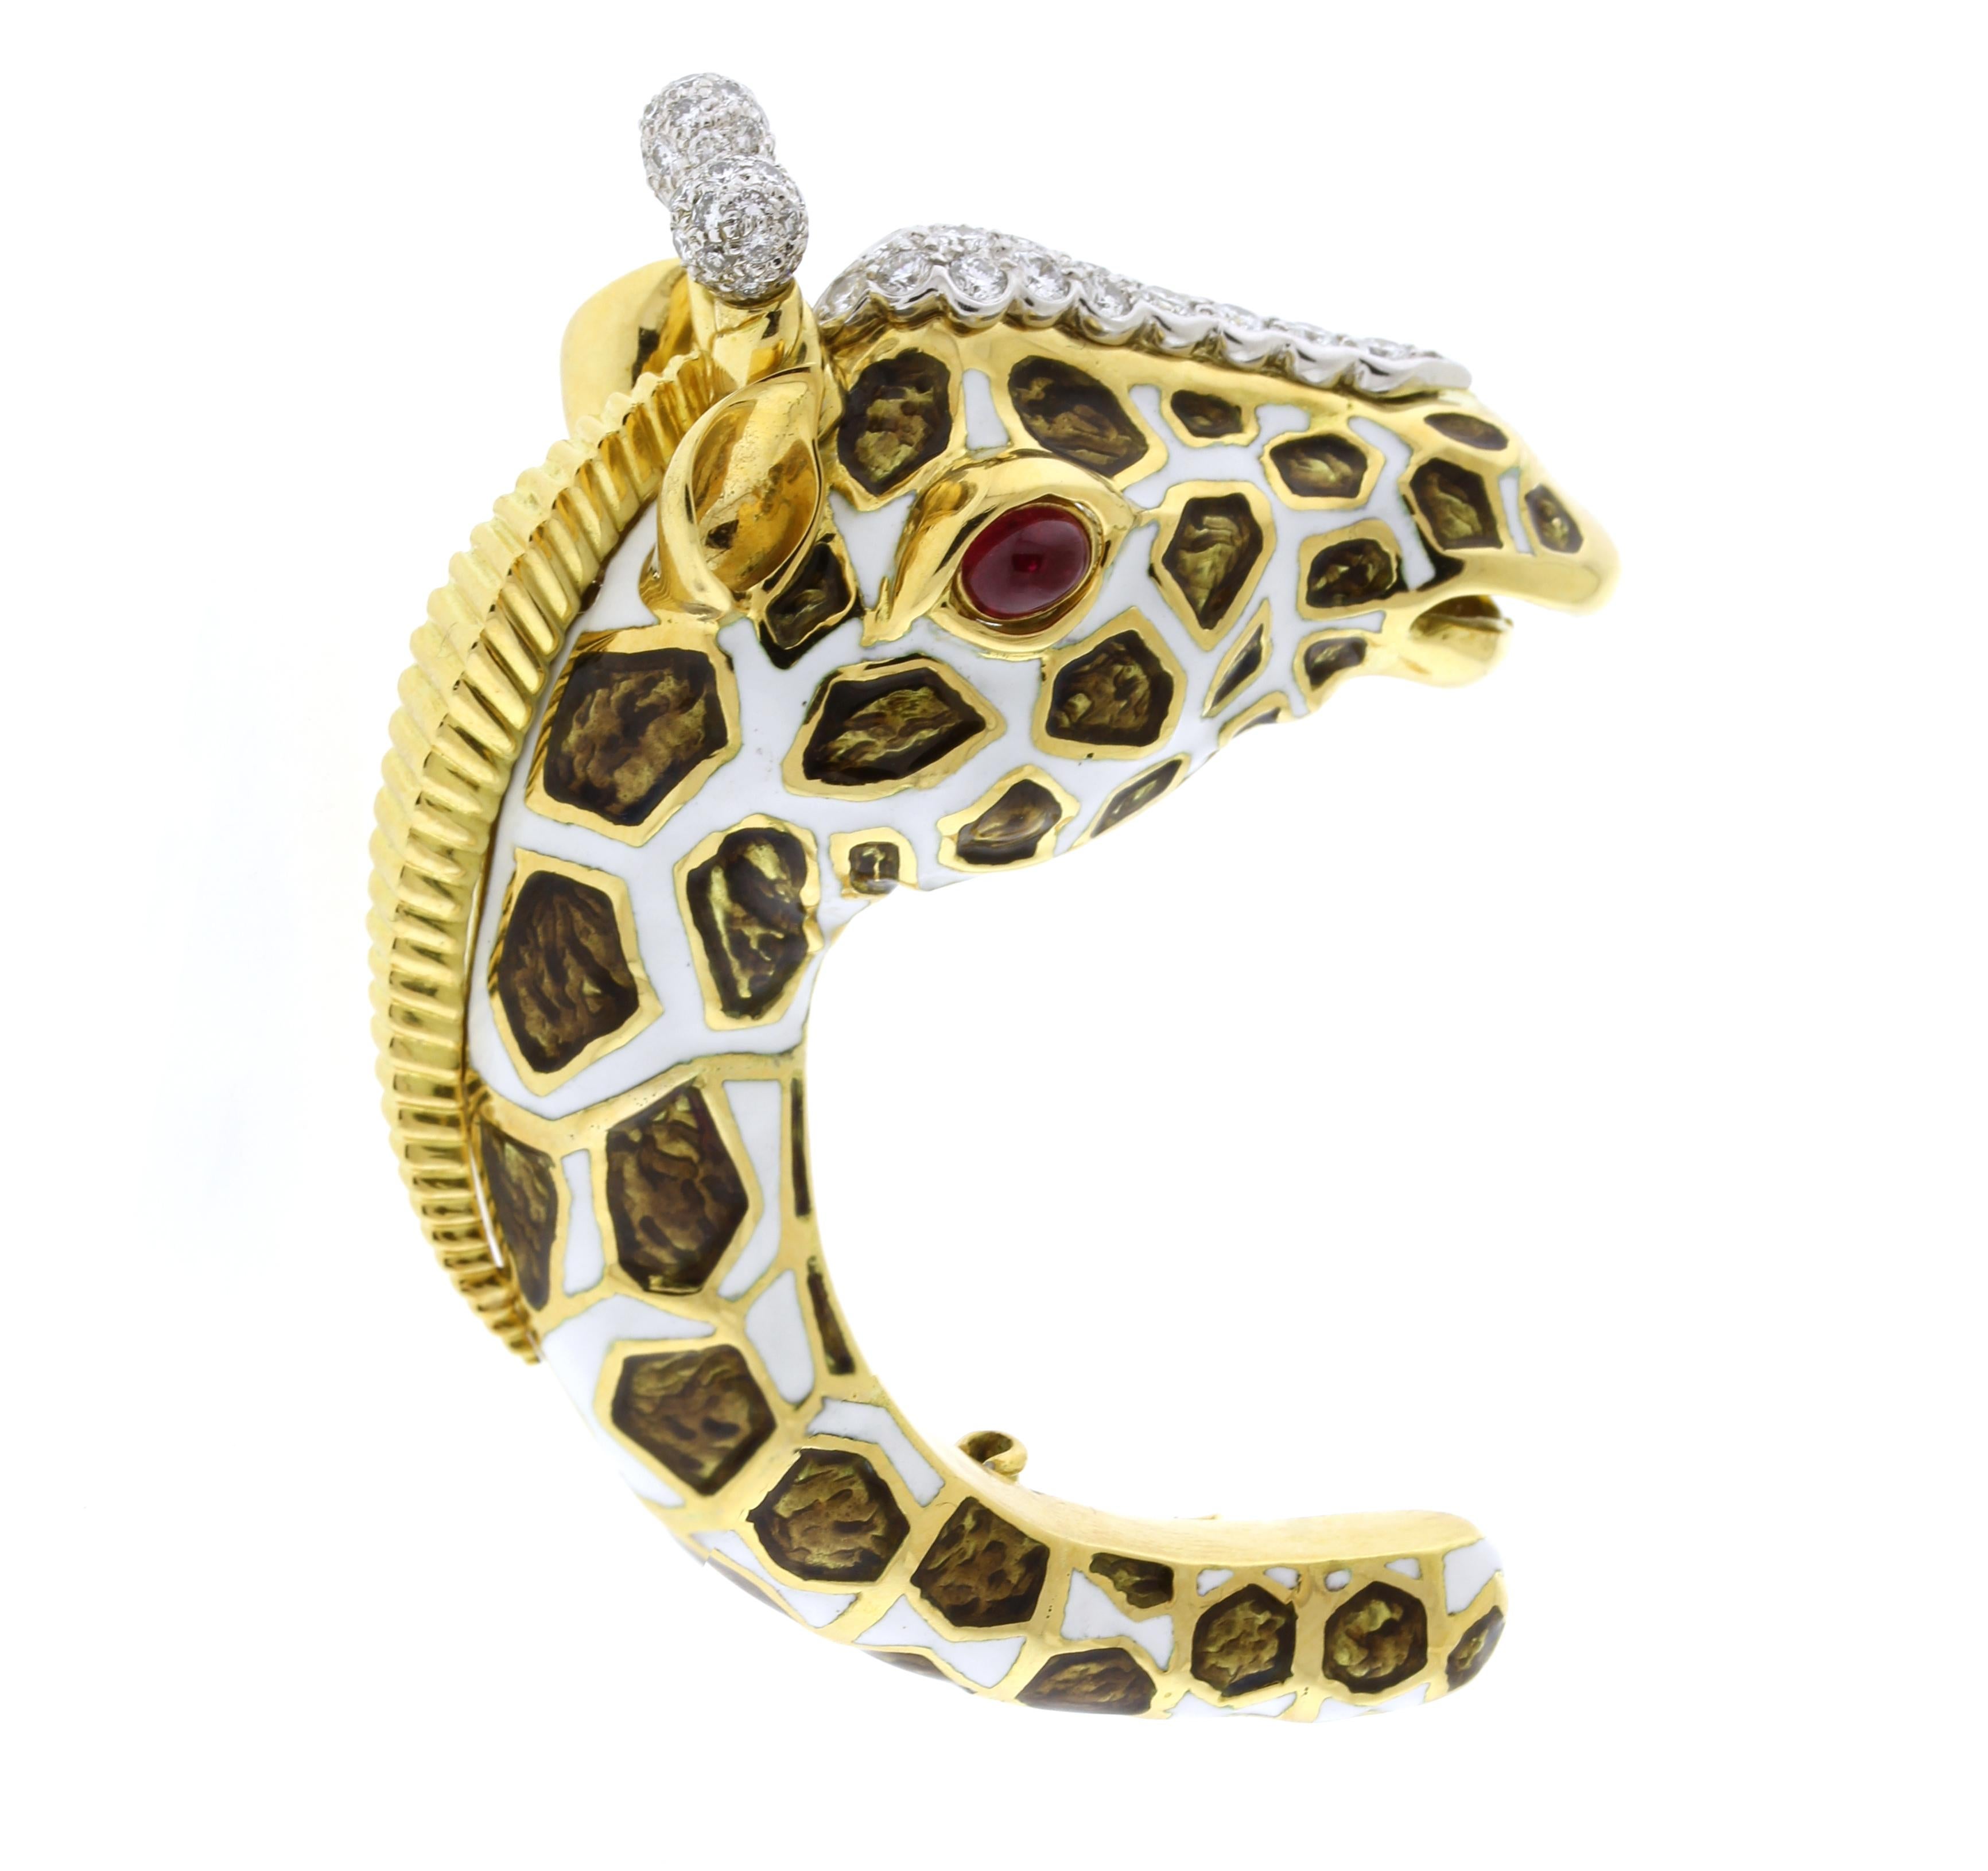 From David Webb's Kingdom Collection, his iconic Giraffe brooch. Fashioned in 18 karat gold and platinum the brooch is meticulously enameled in white with brown paillone enamel represent the giraffes patterned spots. David Webb introduced his first